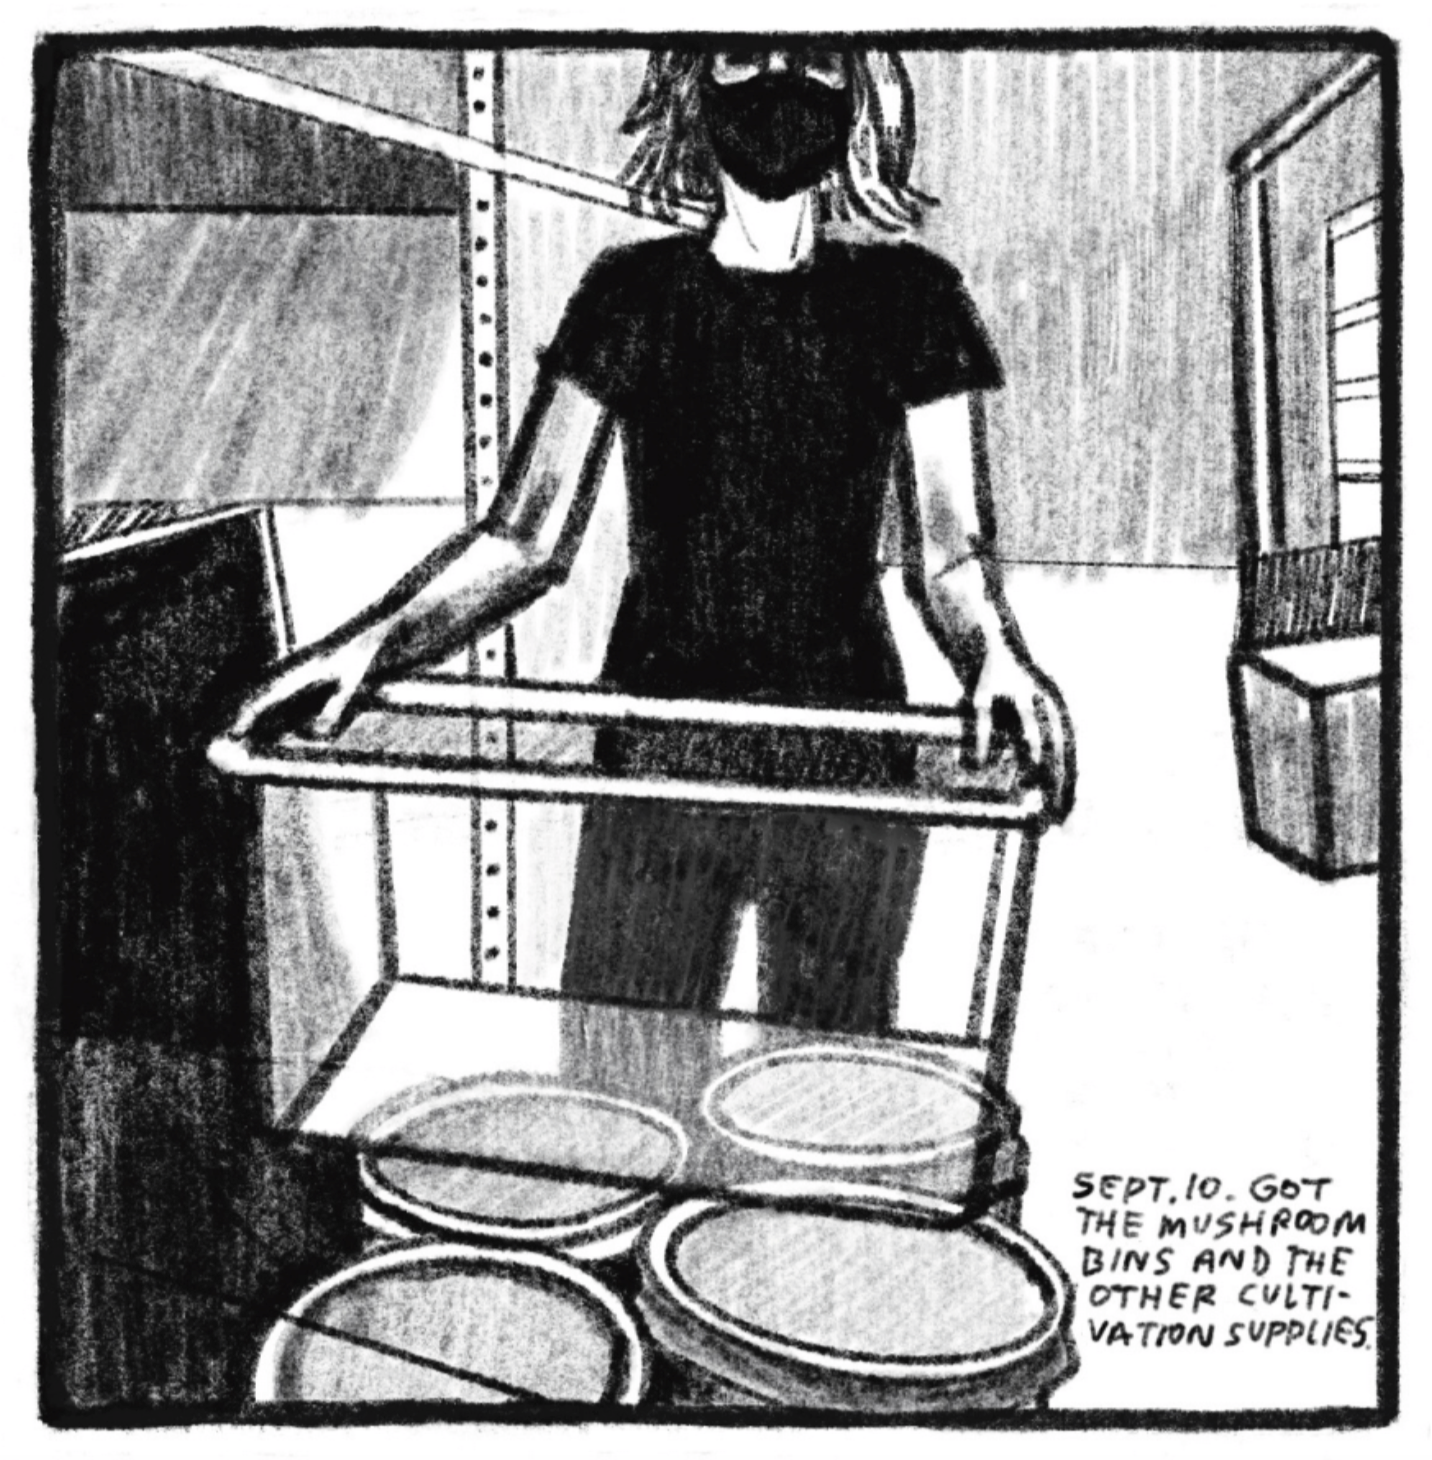 Kim is facing the viewer while holding an empty plastic bin in what looks to be a hardware or furniture store. She is resting the bin on top of some large buckets with lids. â€œSeptember 10. Got the mushroom bins and the other cultivation supplies.â€